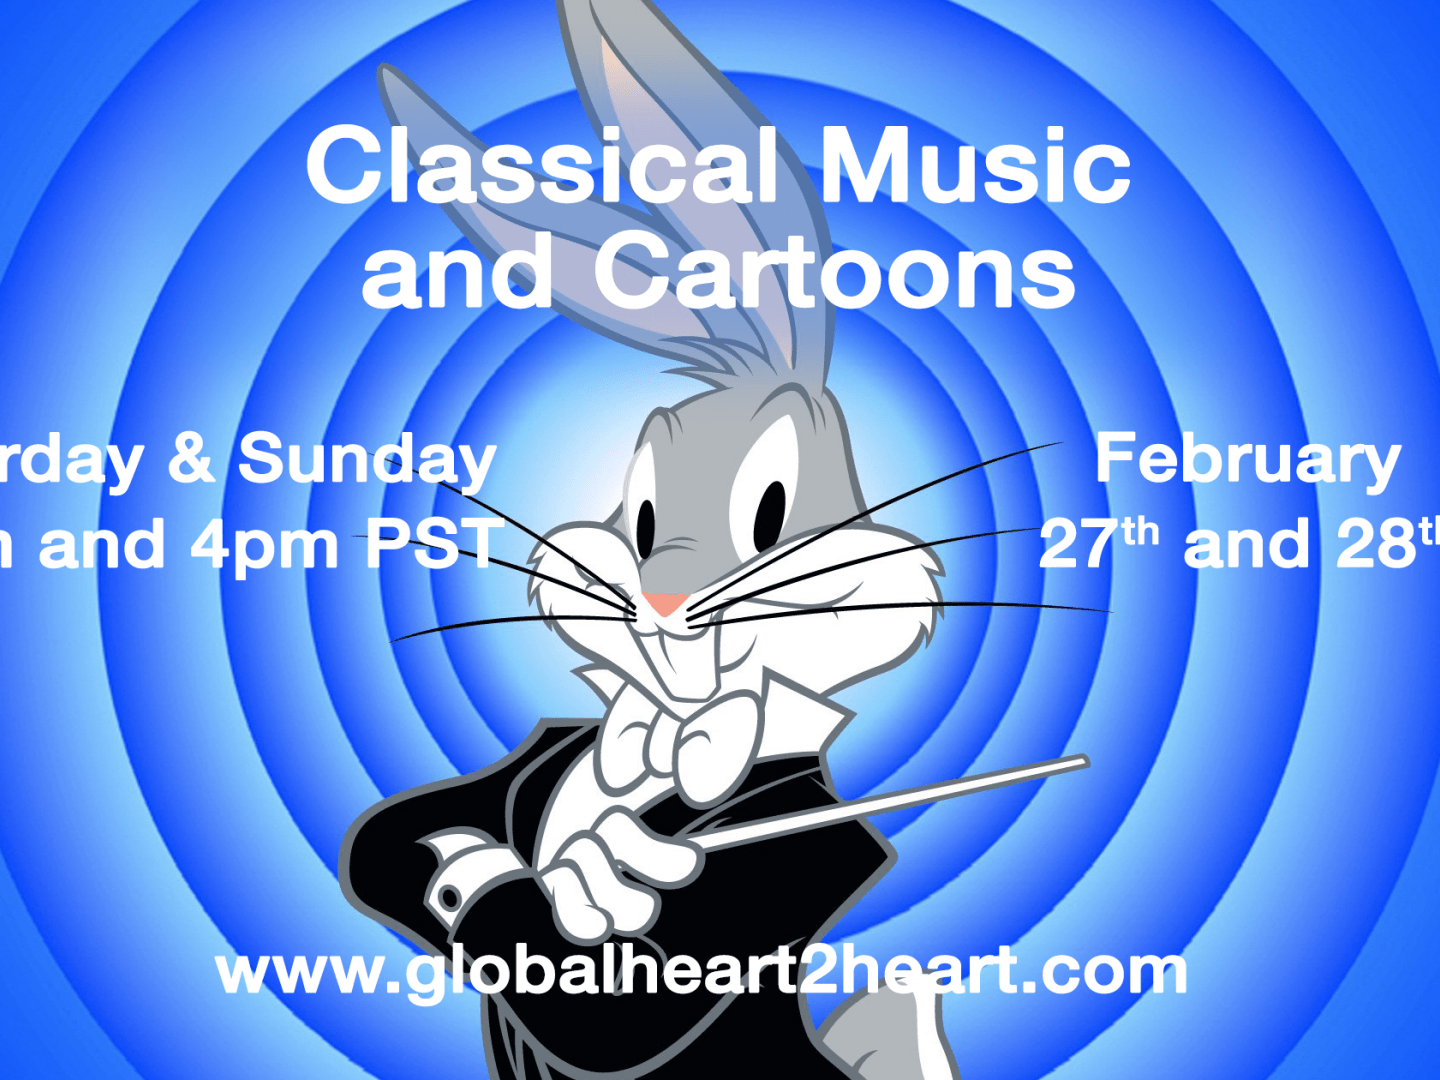 Classical Music and Cartoons this Weekend February 27th and 28th